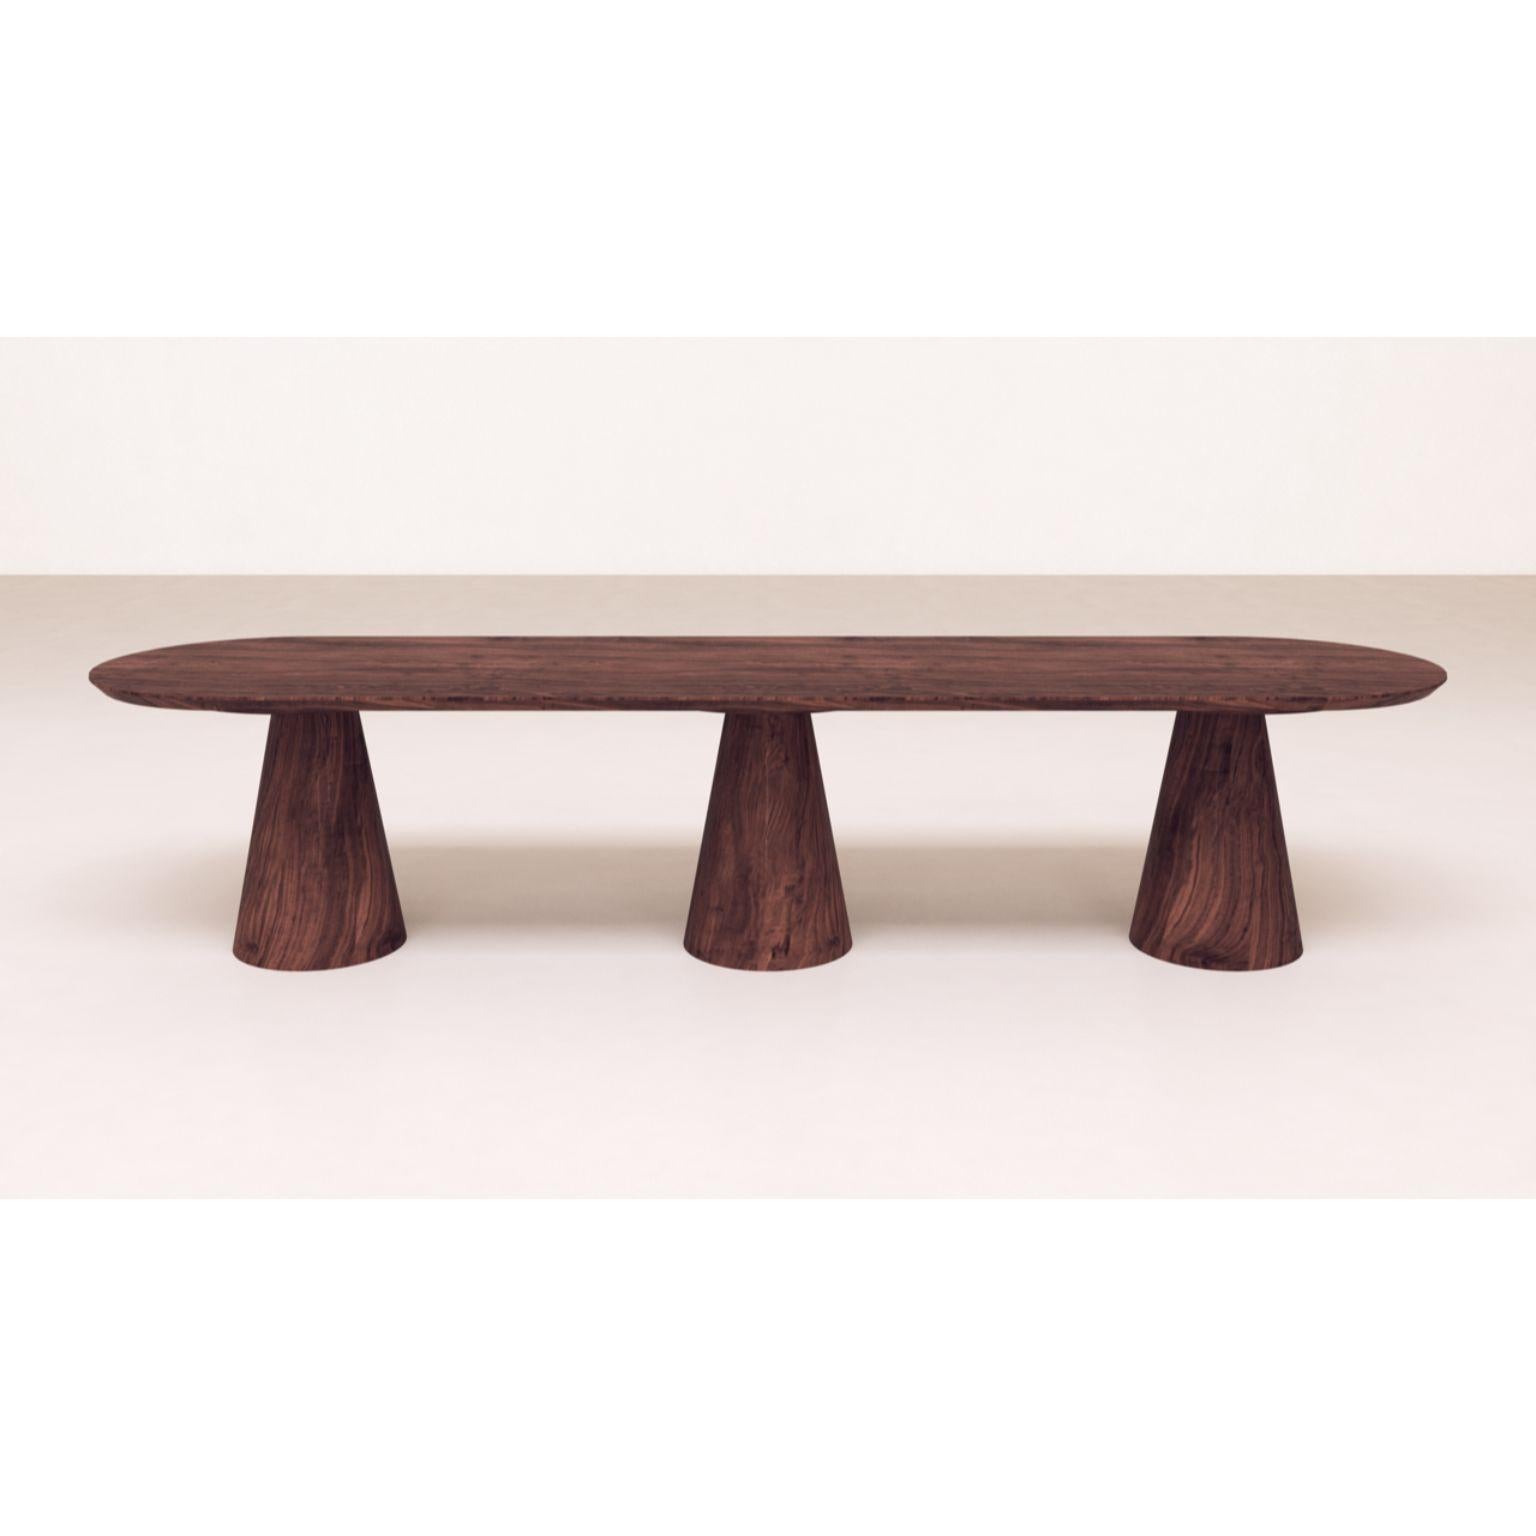 Seventies table by Gigi Design
Unique
Dimensions: D110 x W280 x H75 cm
Materials: Solid Walnut

Handcrafted in our workshop, our pieces are unique, signed and exclusive.
Unable to find his furniture elsewhere, we we re-adapt each piece